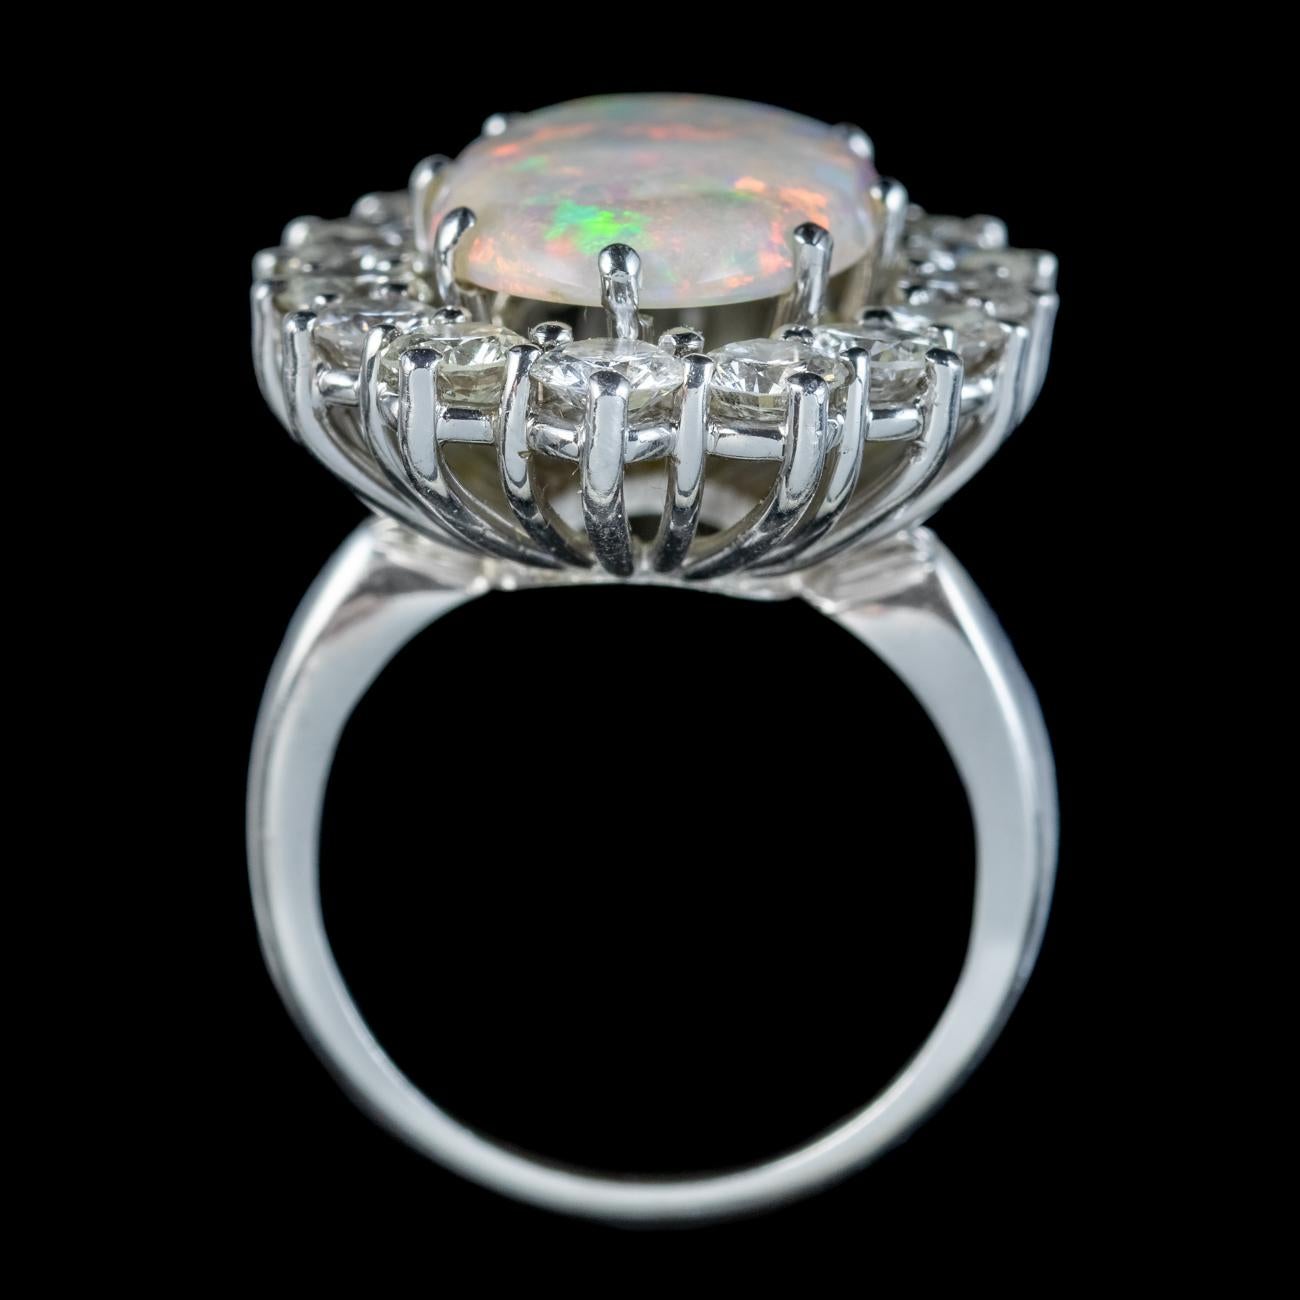 Cabochon Vintage Opal Diamond Cocktail Ring 12 Ct Opal 4 Ct Diamond For Sale